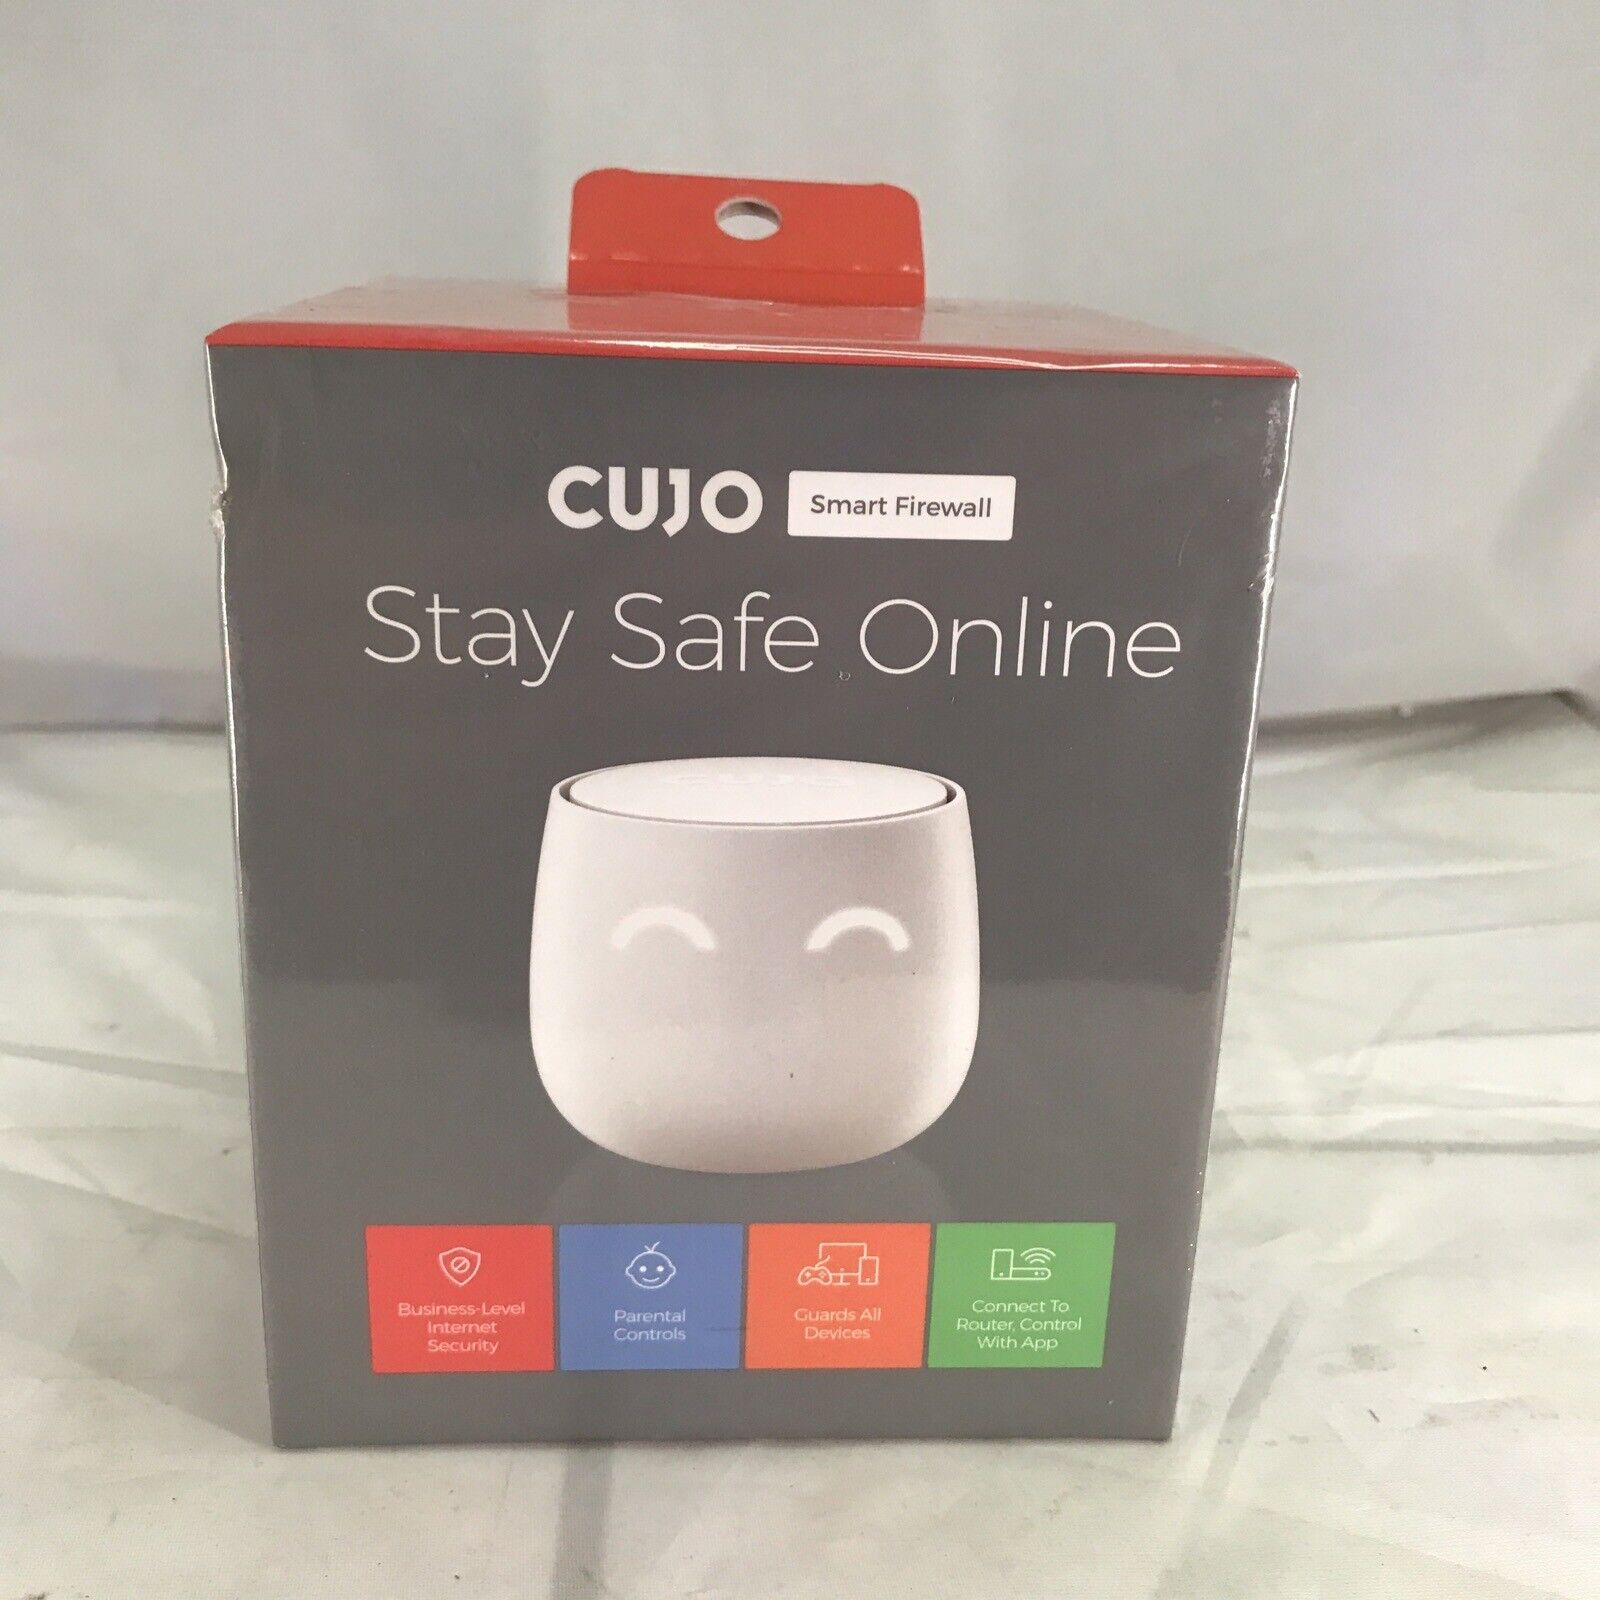 CUJO A0001 Smart Firewall Network Router - Sealed Box